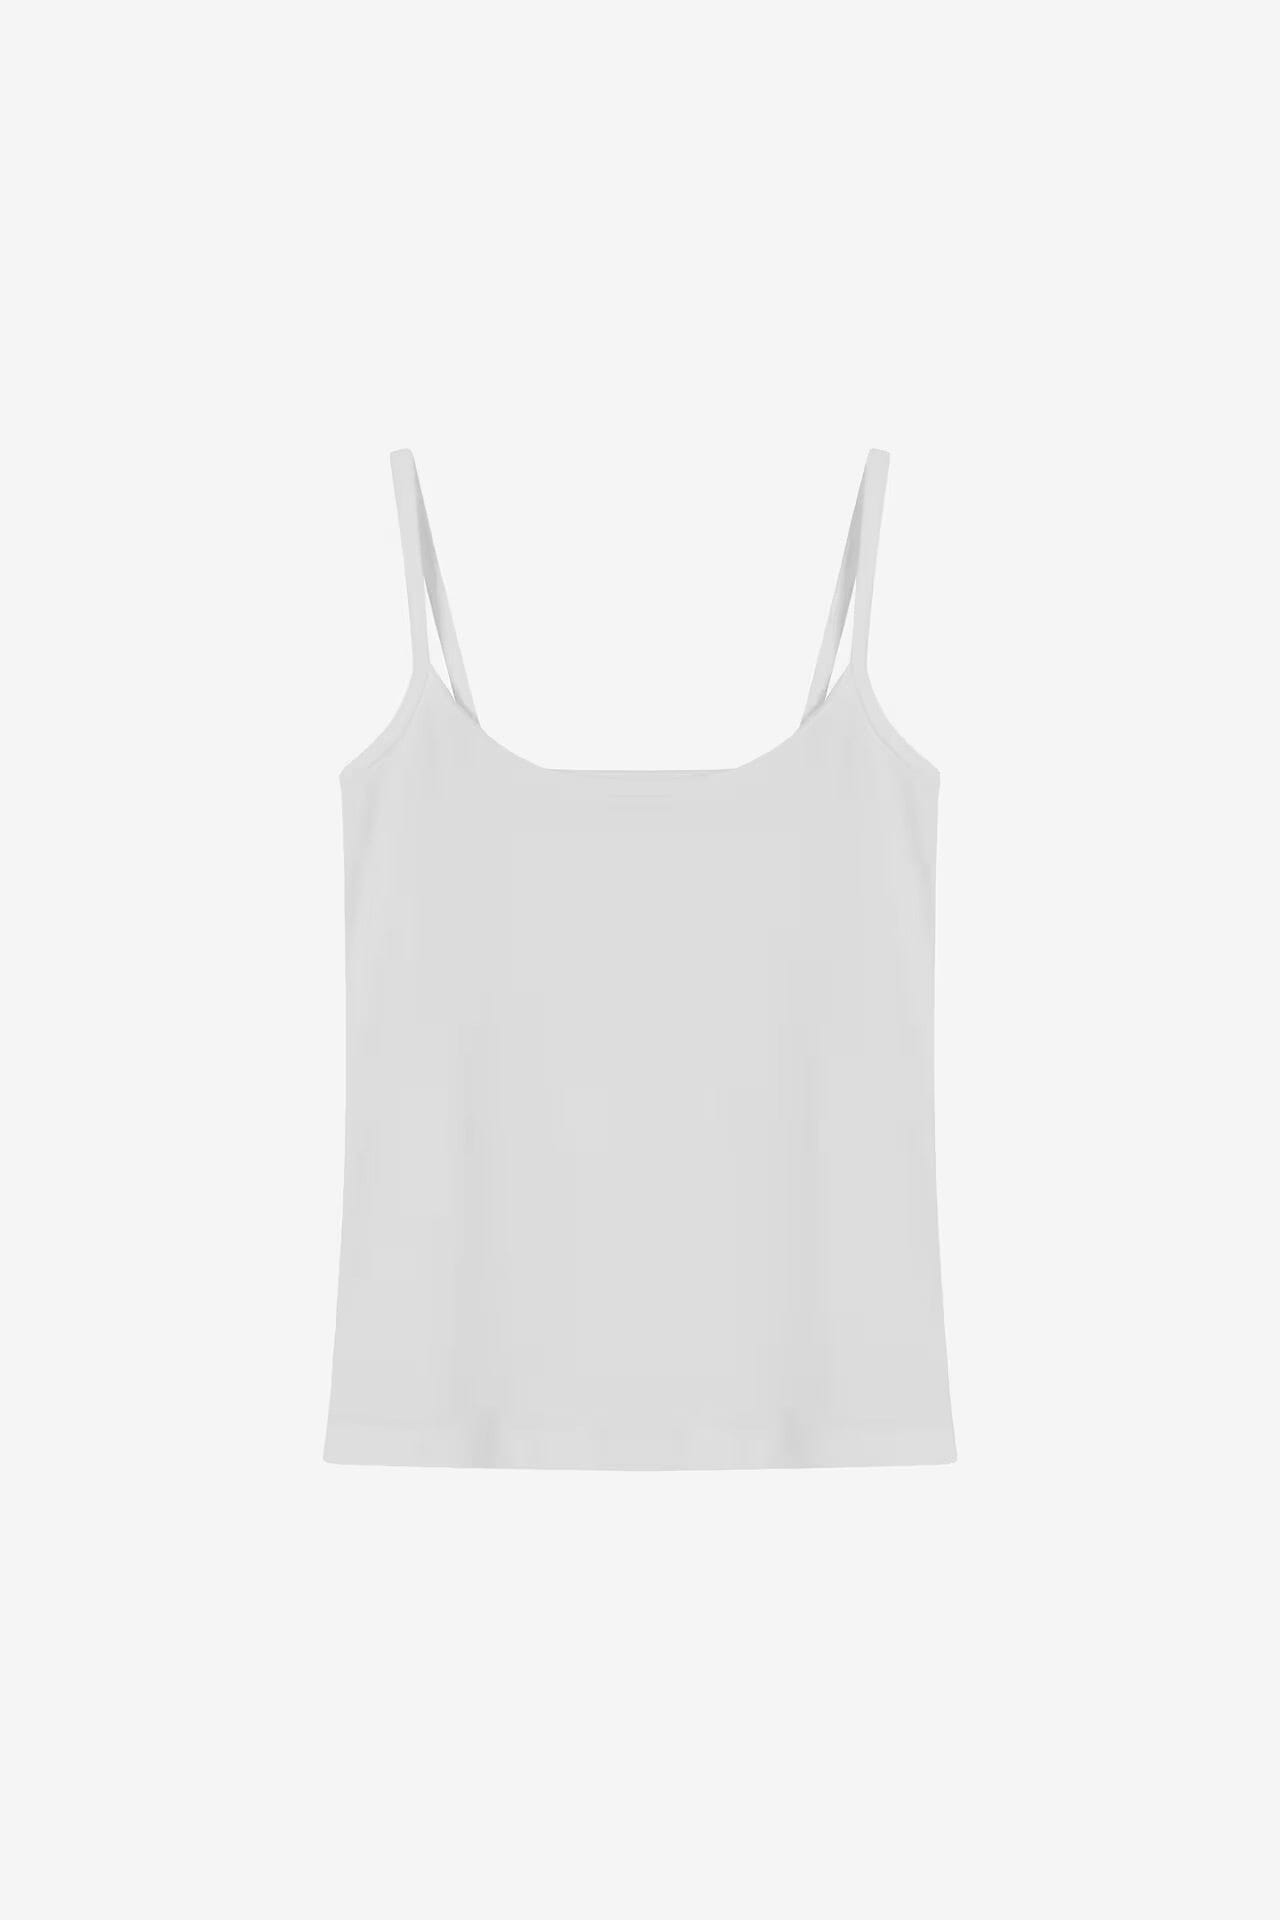 Bread and Boxers Singlet White T-shirt